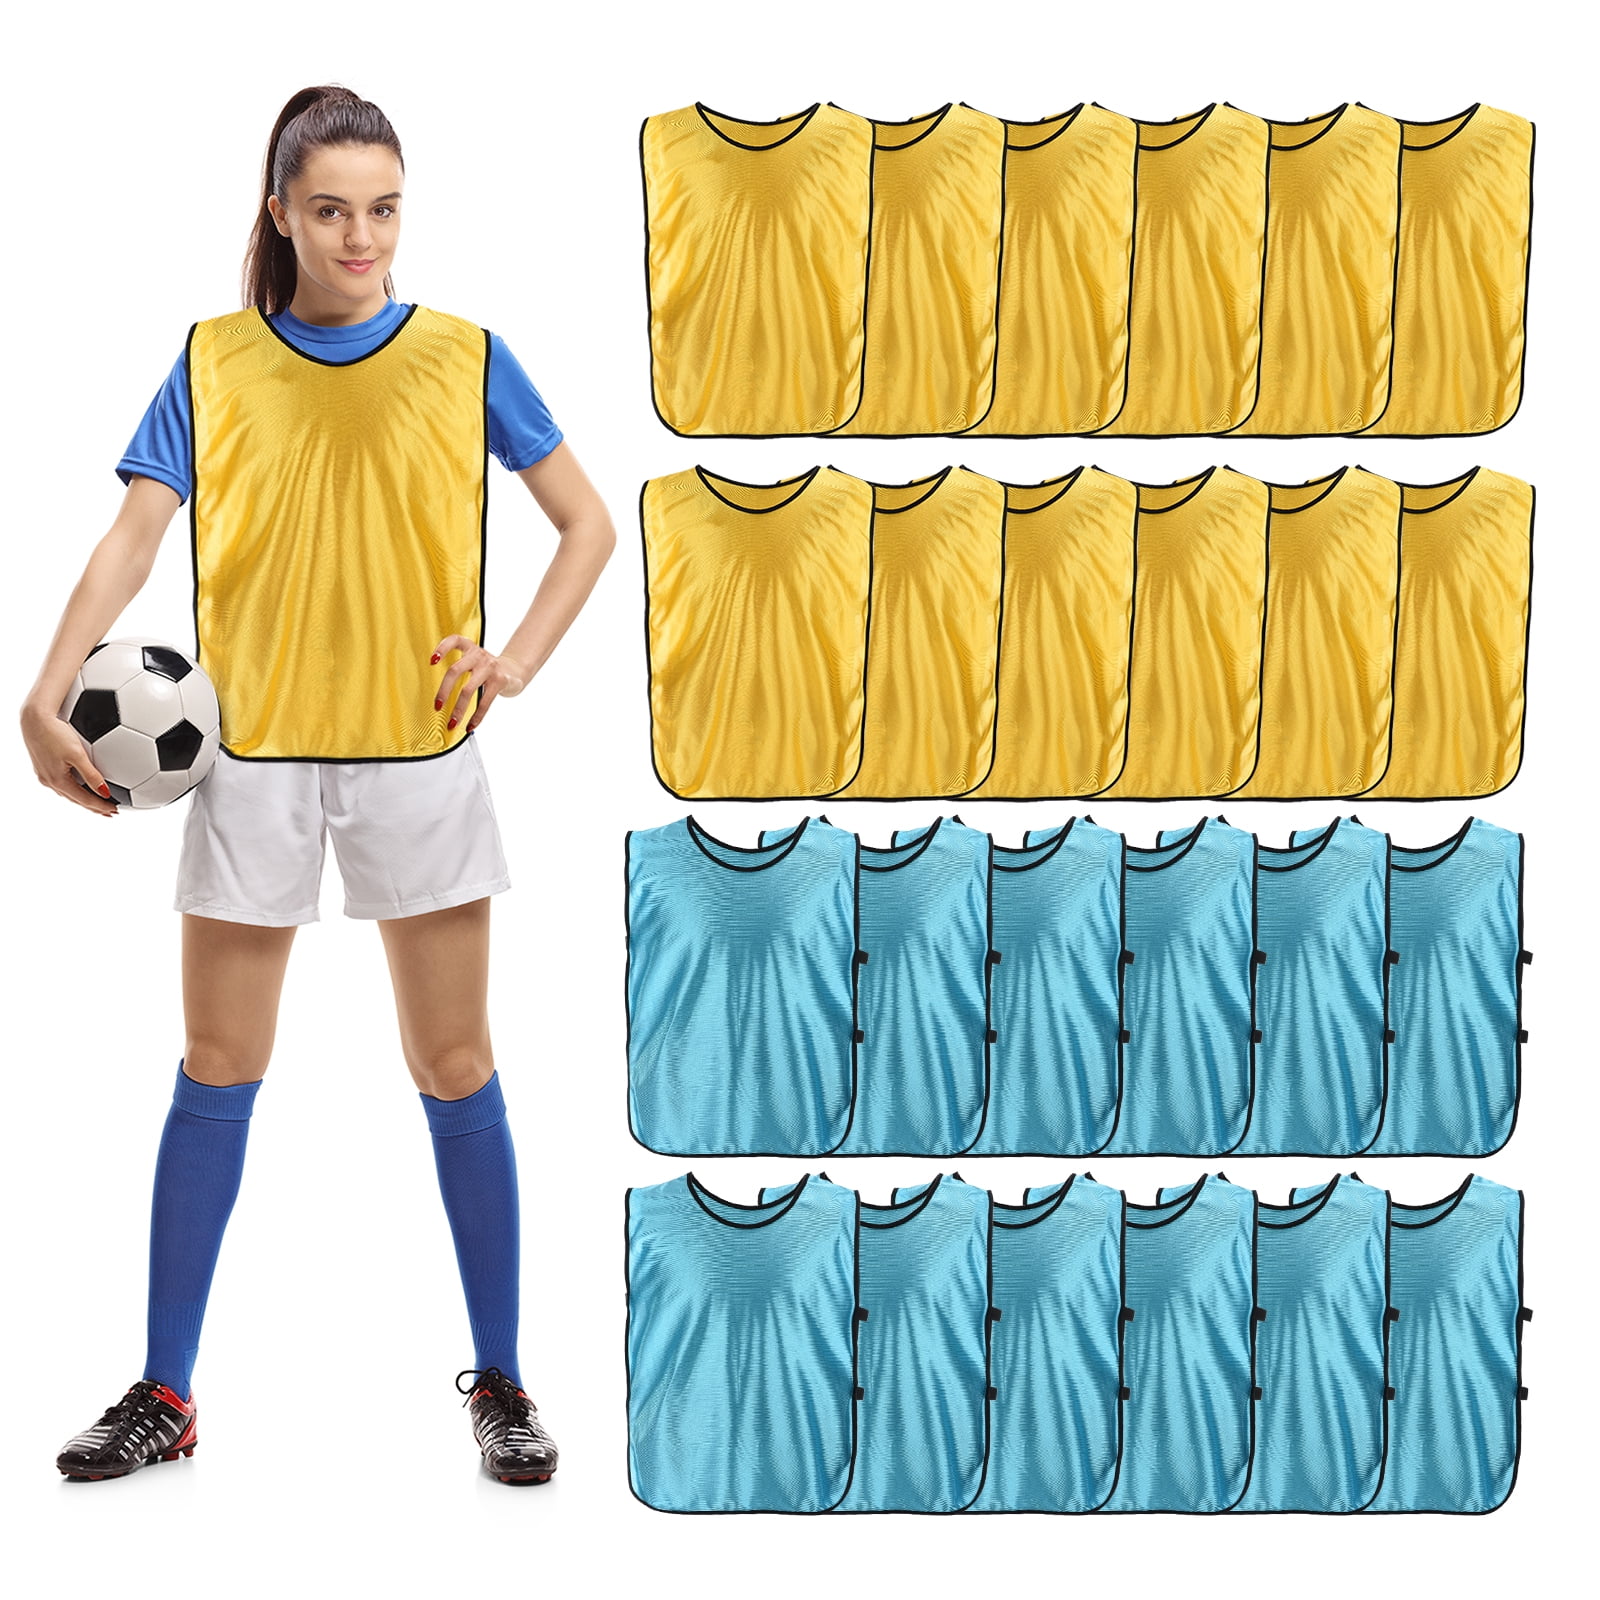 Jiuguva 24 Packs Sports Pinnies Soccer Basketball Team Practice Vest  Pennies Scrimmage Vests for Kids Youth and Adults, Blue and Red